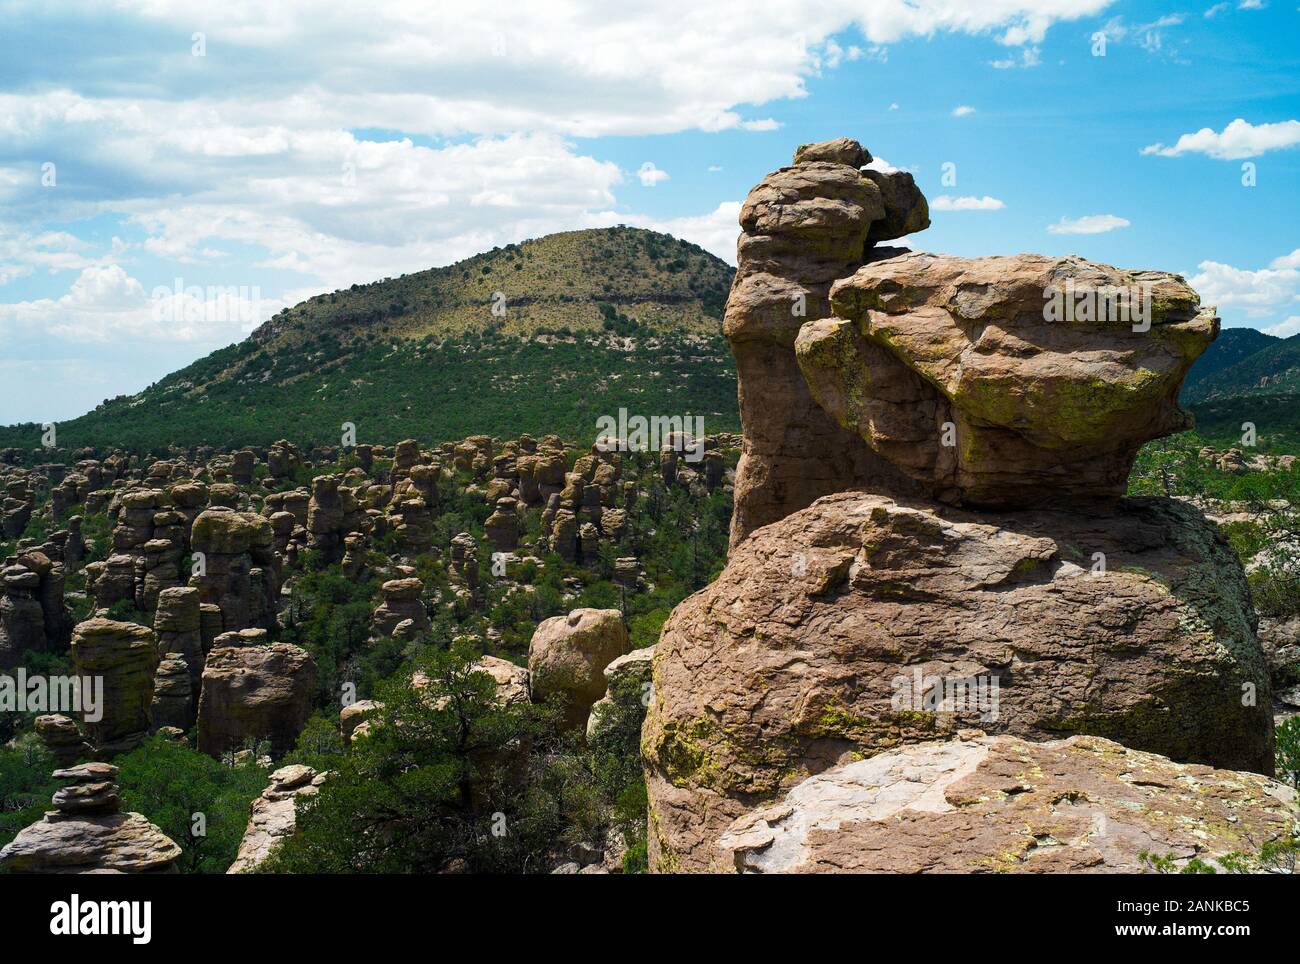 Chiricahua National Monument Landscape with Rock Formations in Arizona, United States Stock Photo